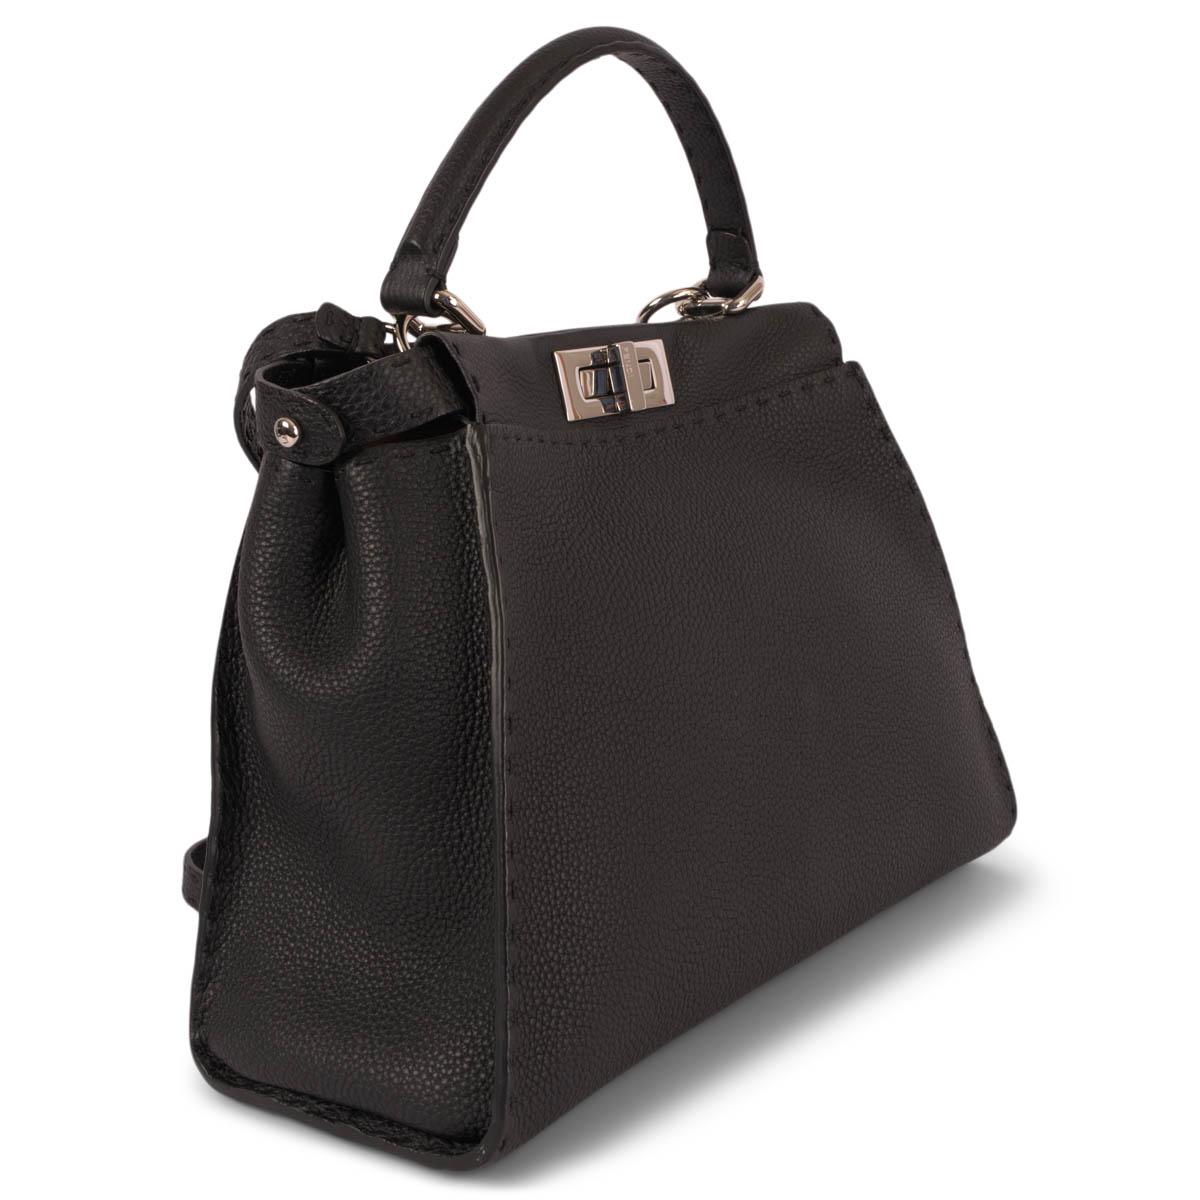 100% authentic Fendi Peekaboo ISeeU Medium Selleria bag in black Cuoio Romano leather. Features hand stitched details, classic twist lock on both sides and an adjustable and detachable shoulder strap. Inside is divided into two compartments and is